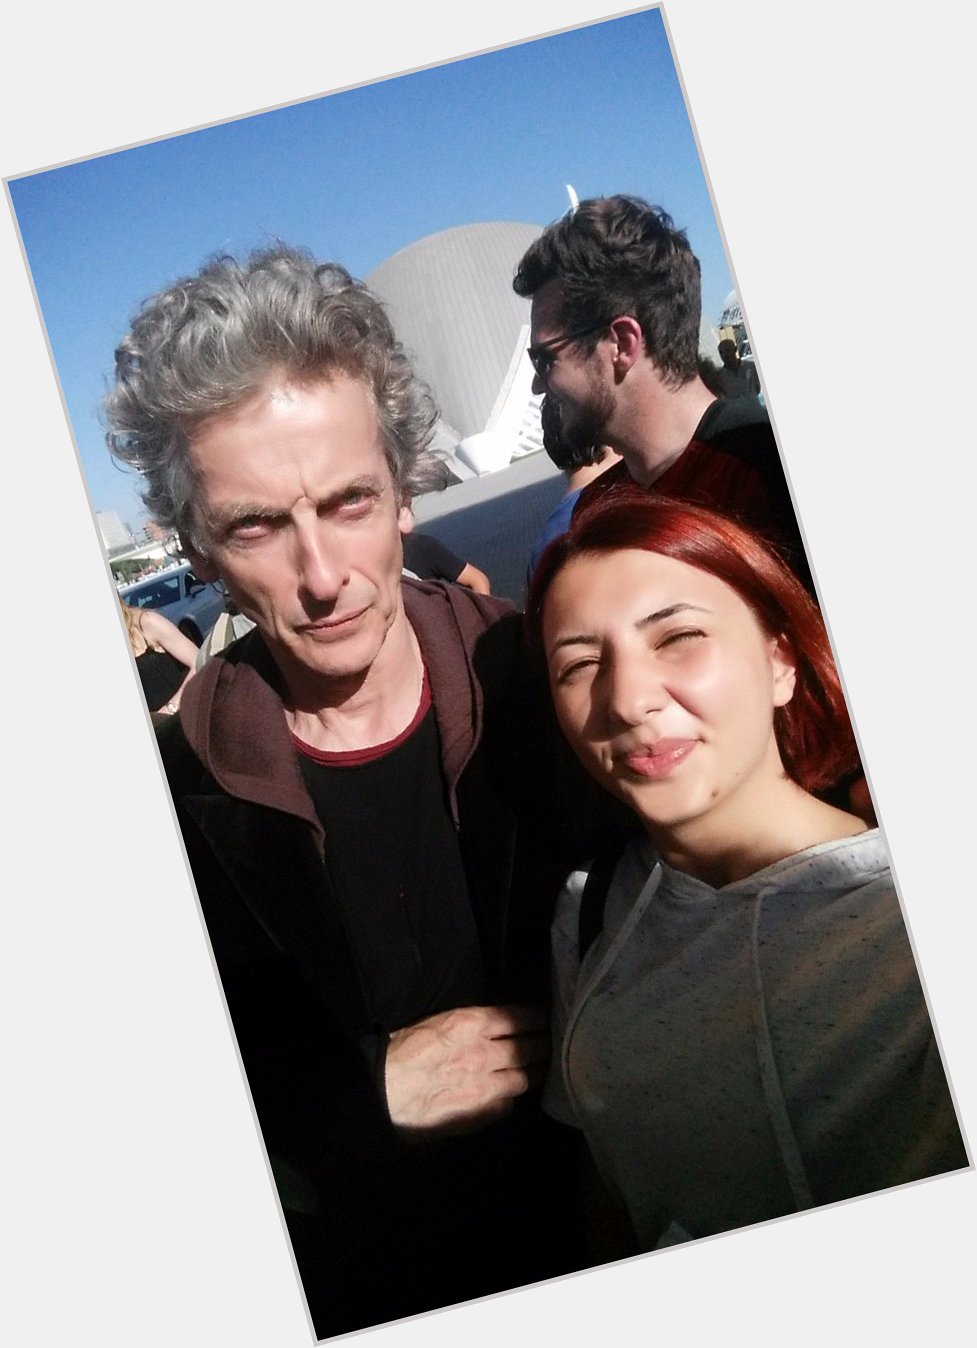 Happy birthday to Peter Capaldi! dont mind my potato face, focus on him being cool 